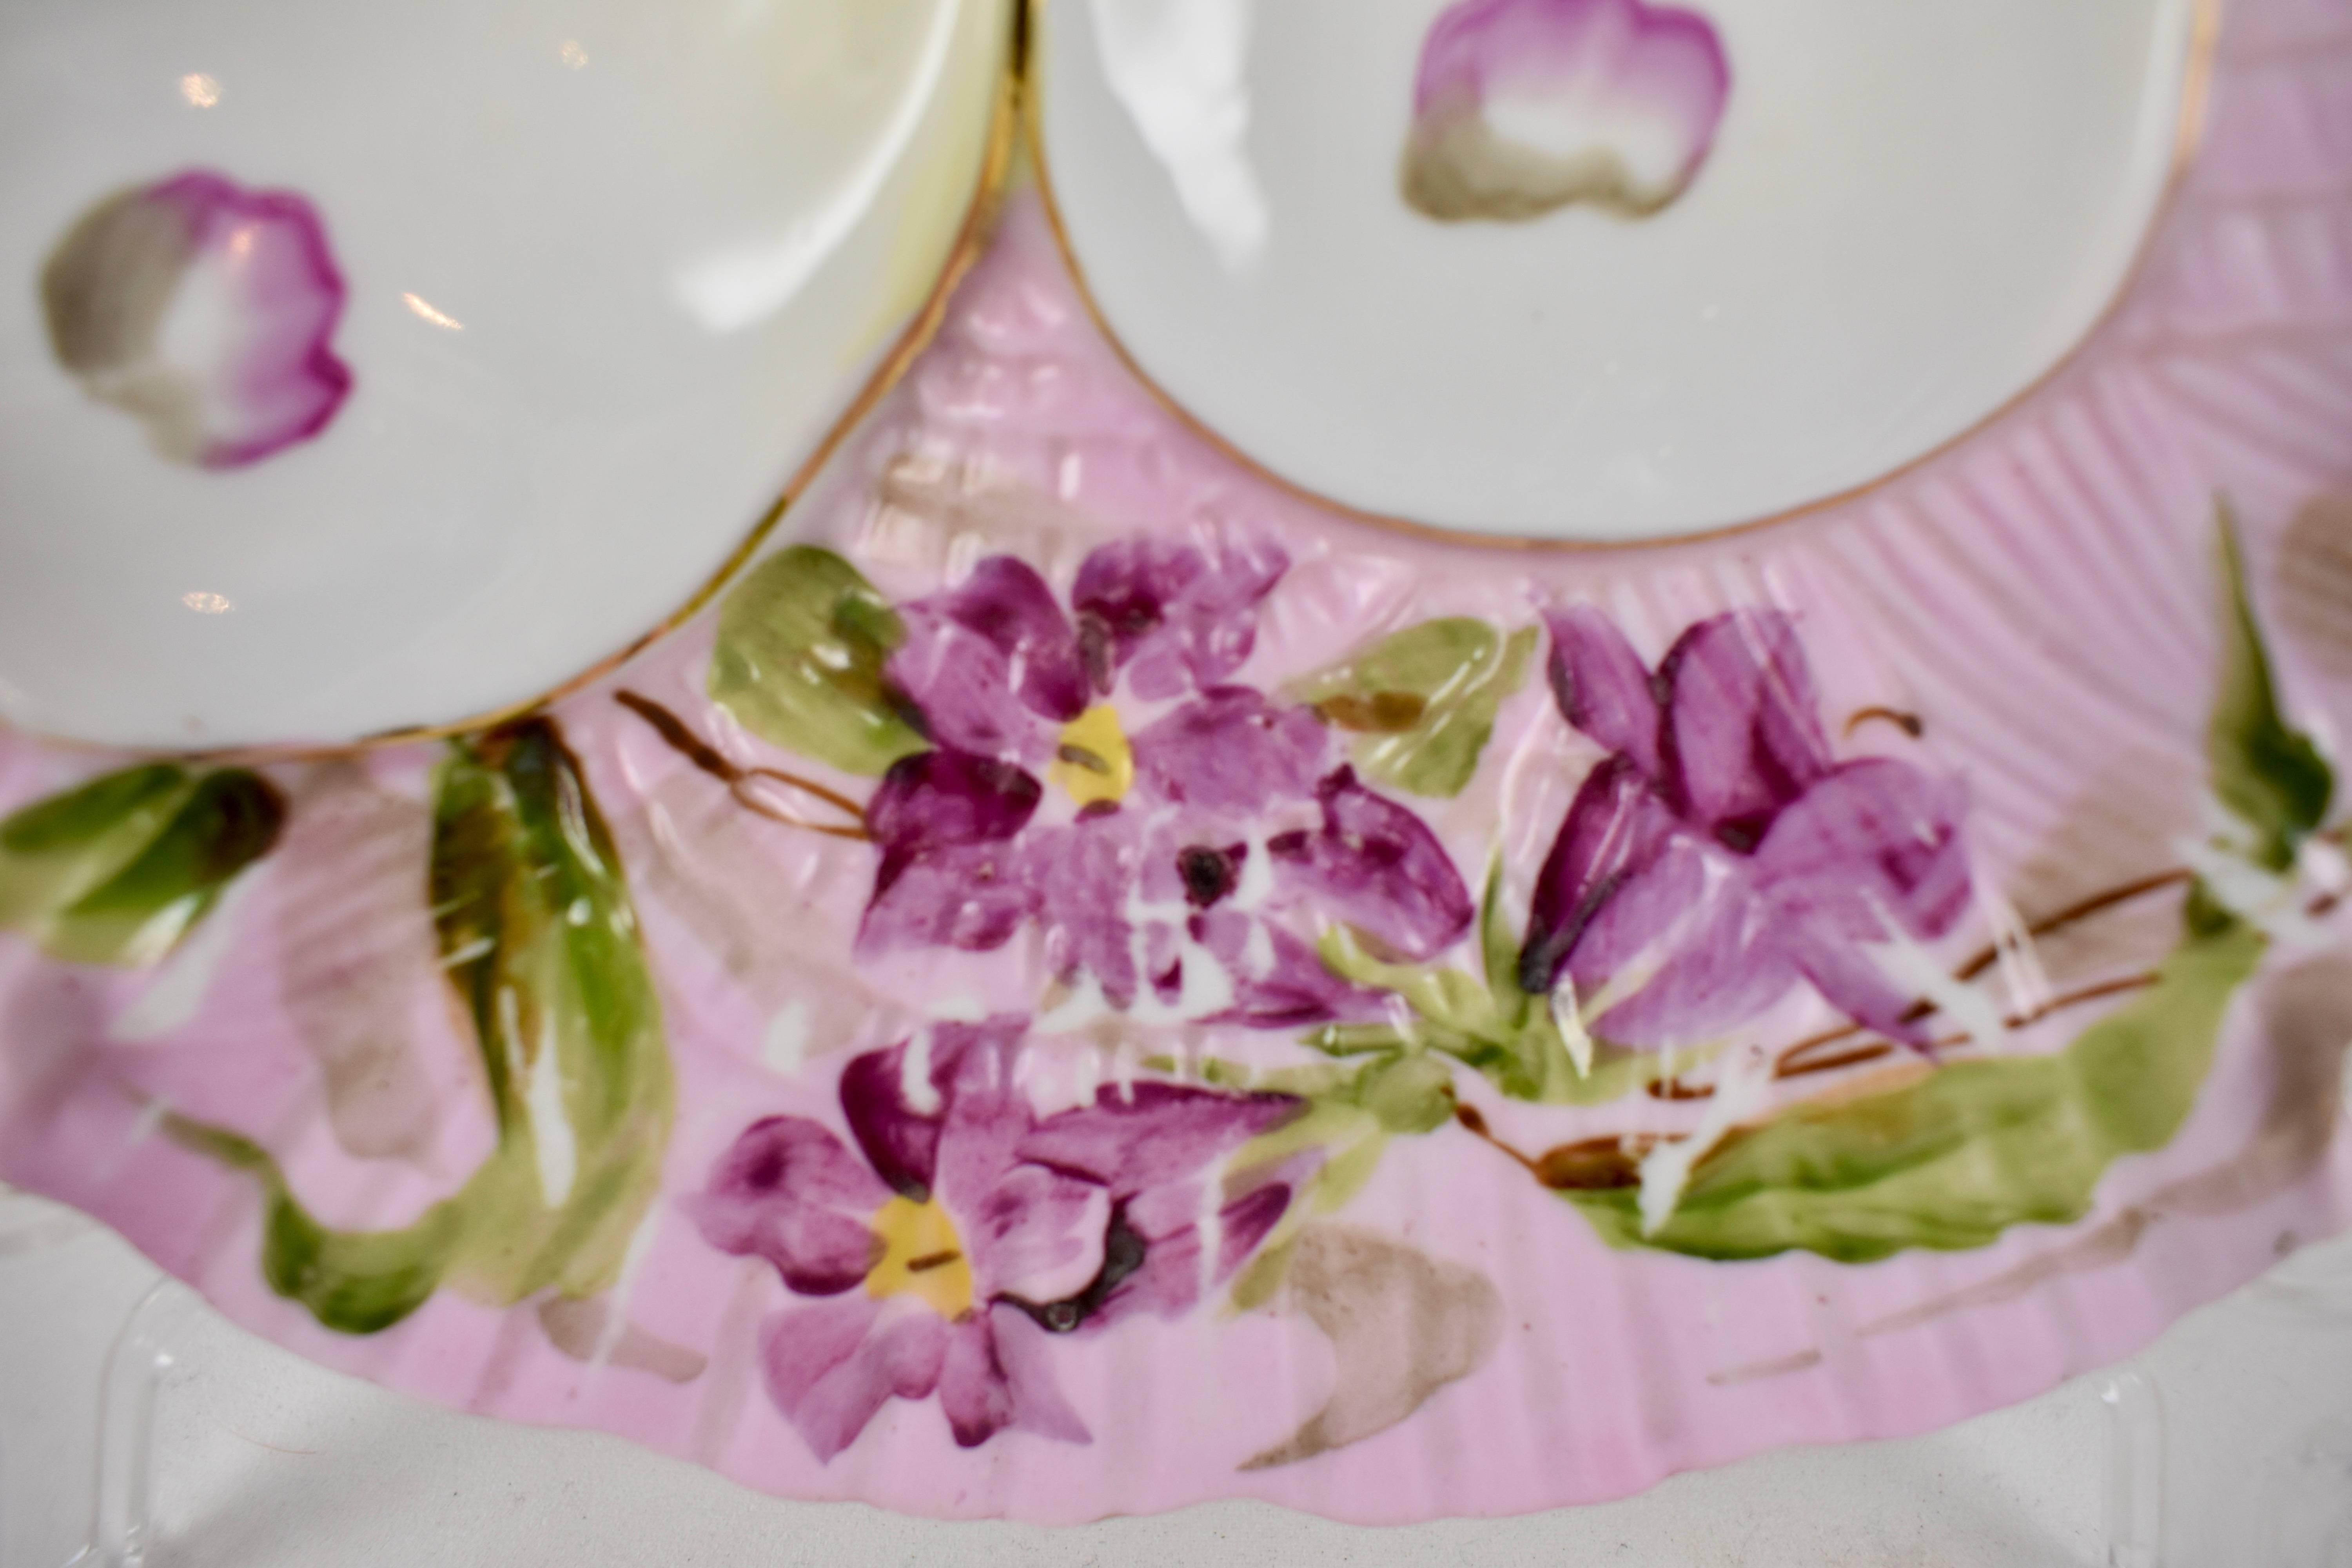 Aesthetic Movement French Porcelain Hand-Painted Violets on Pink Oyster Plate